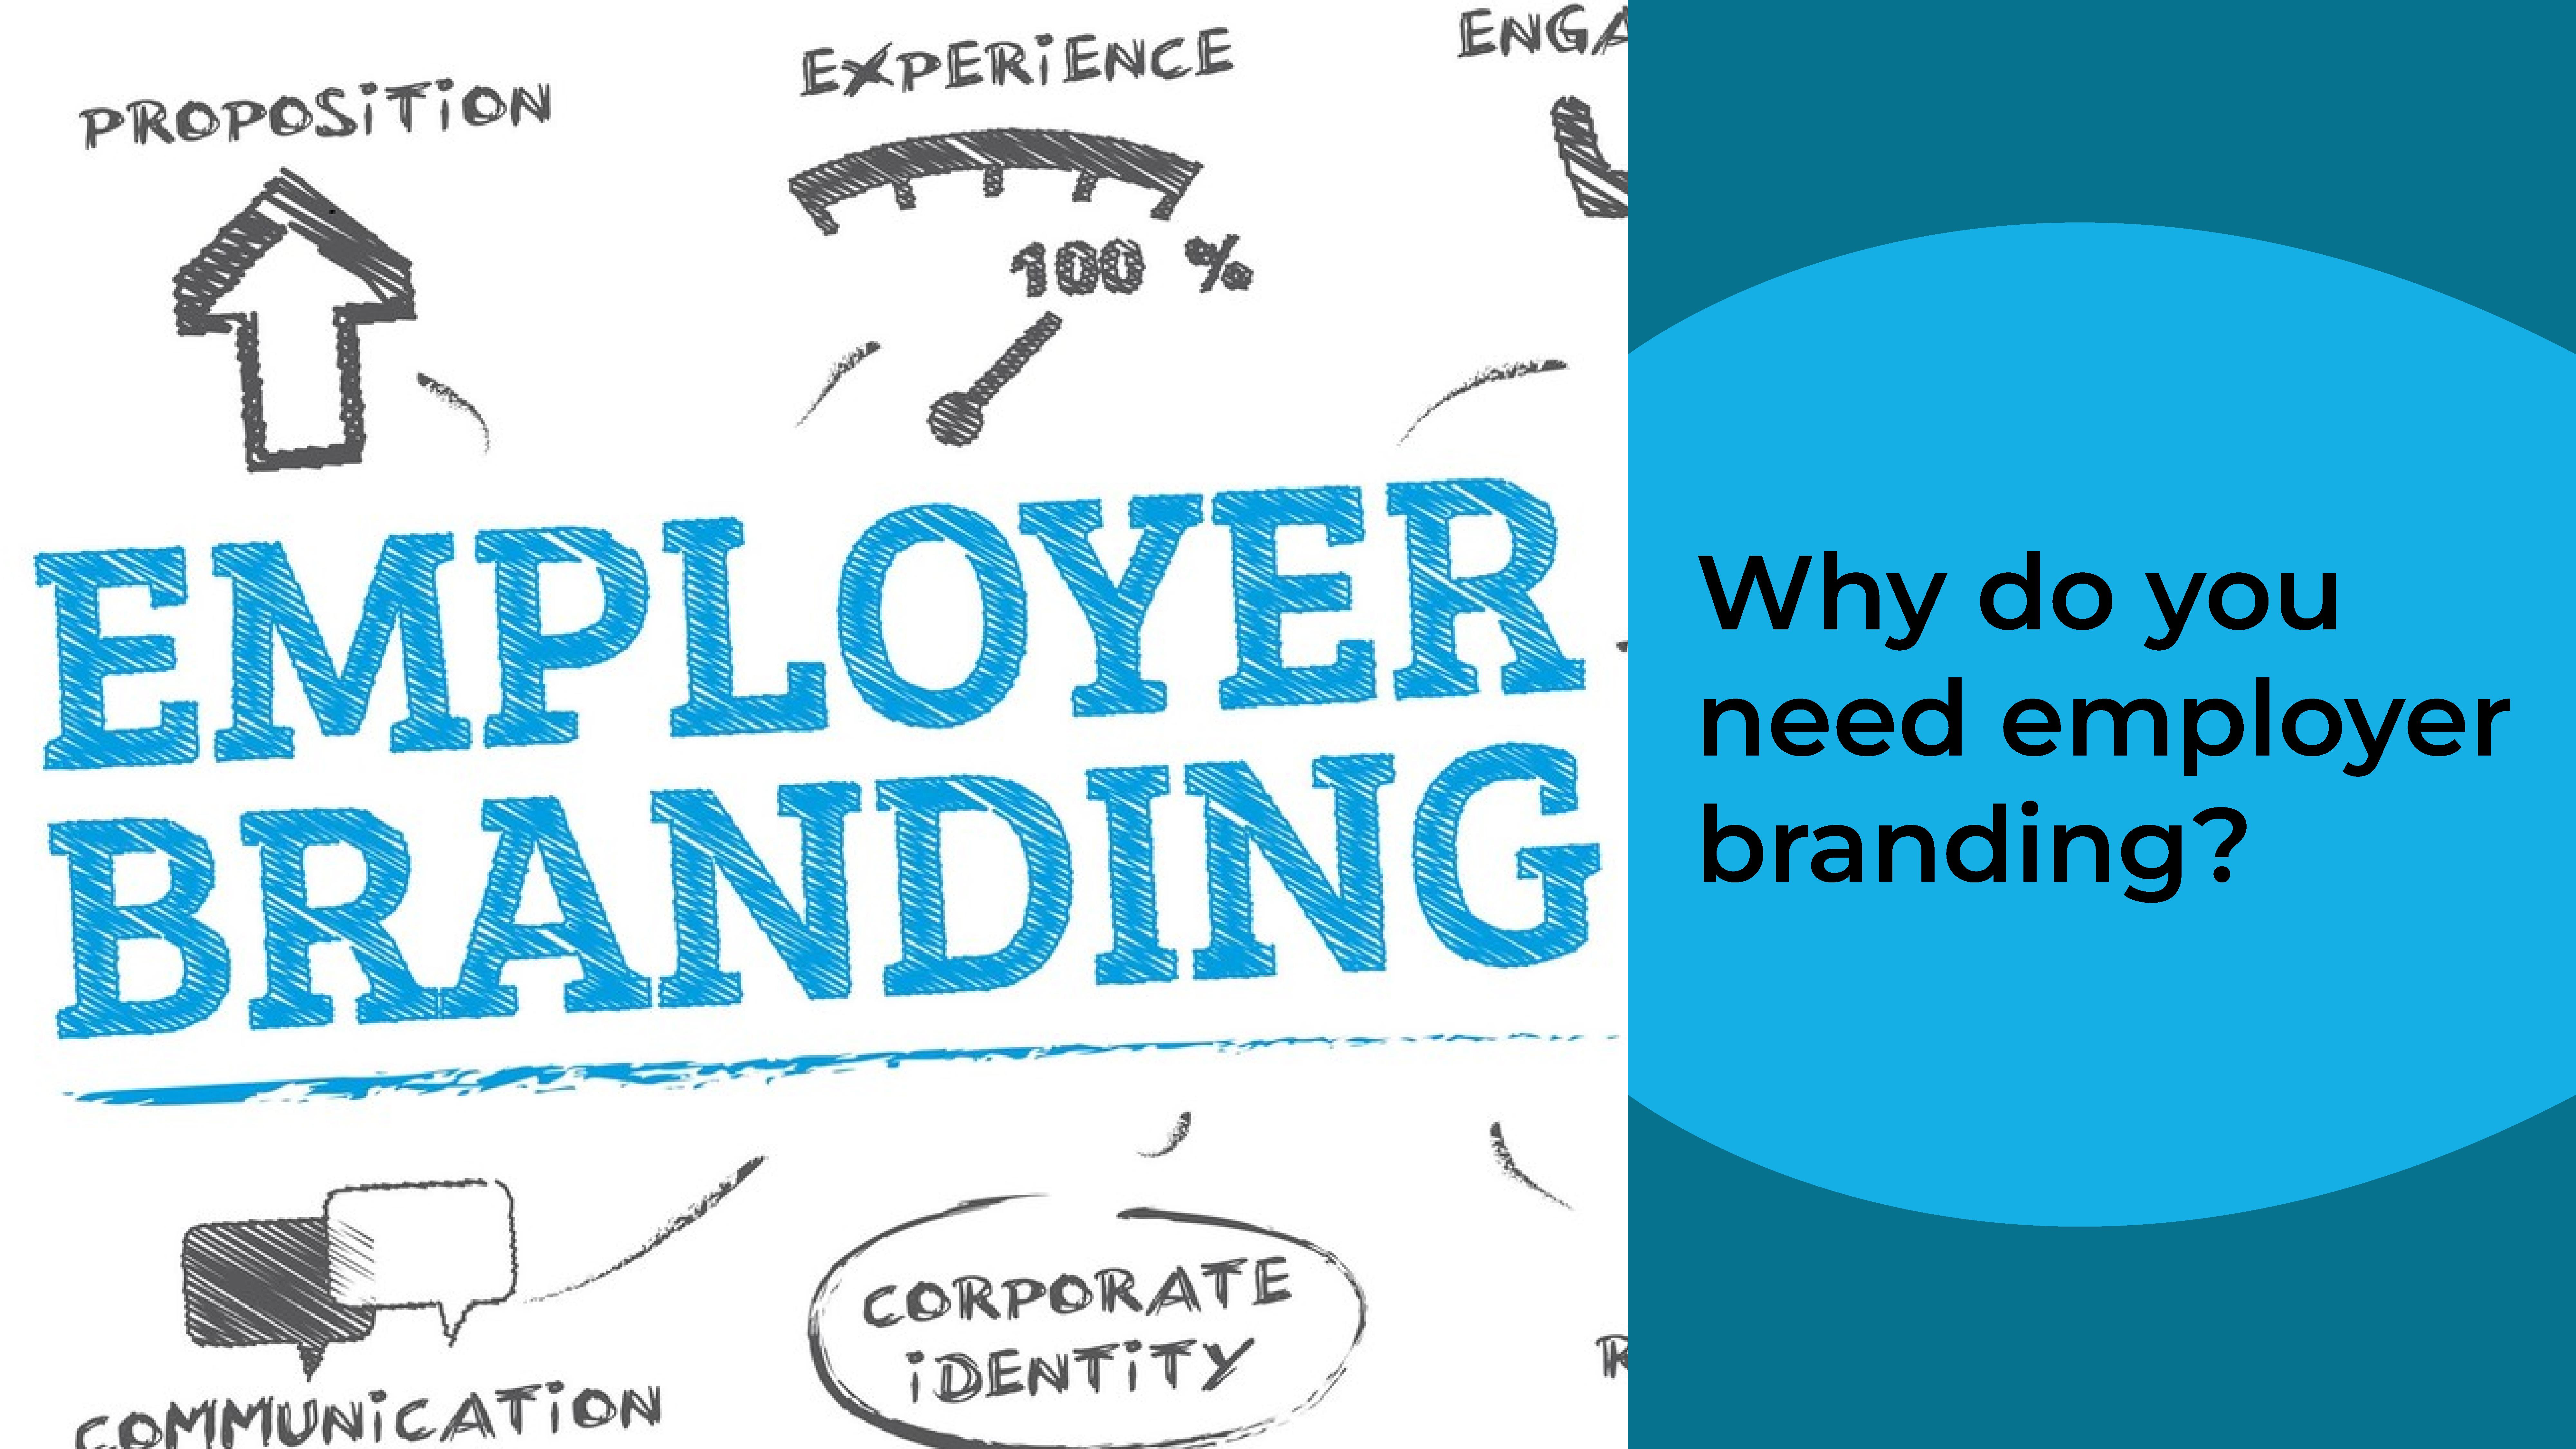 Why do you need employer branding?